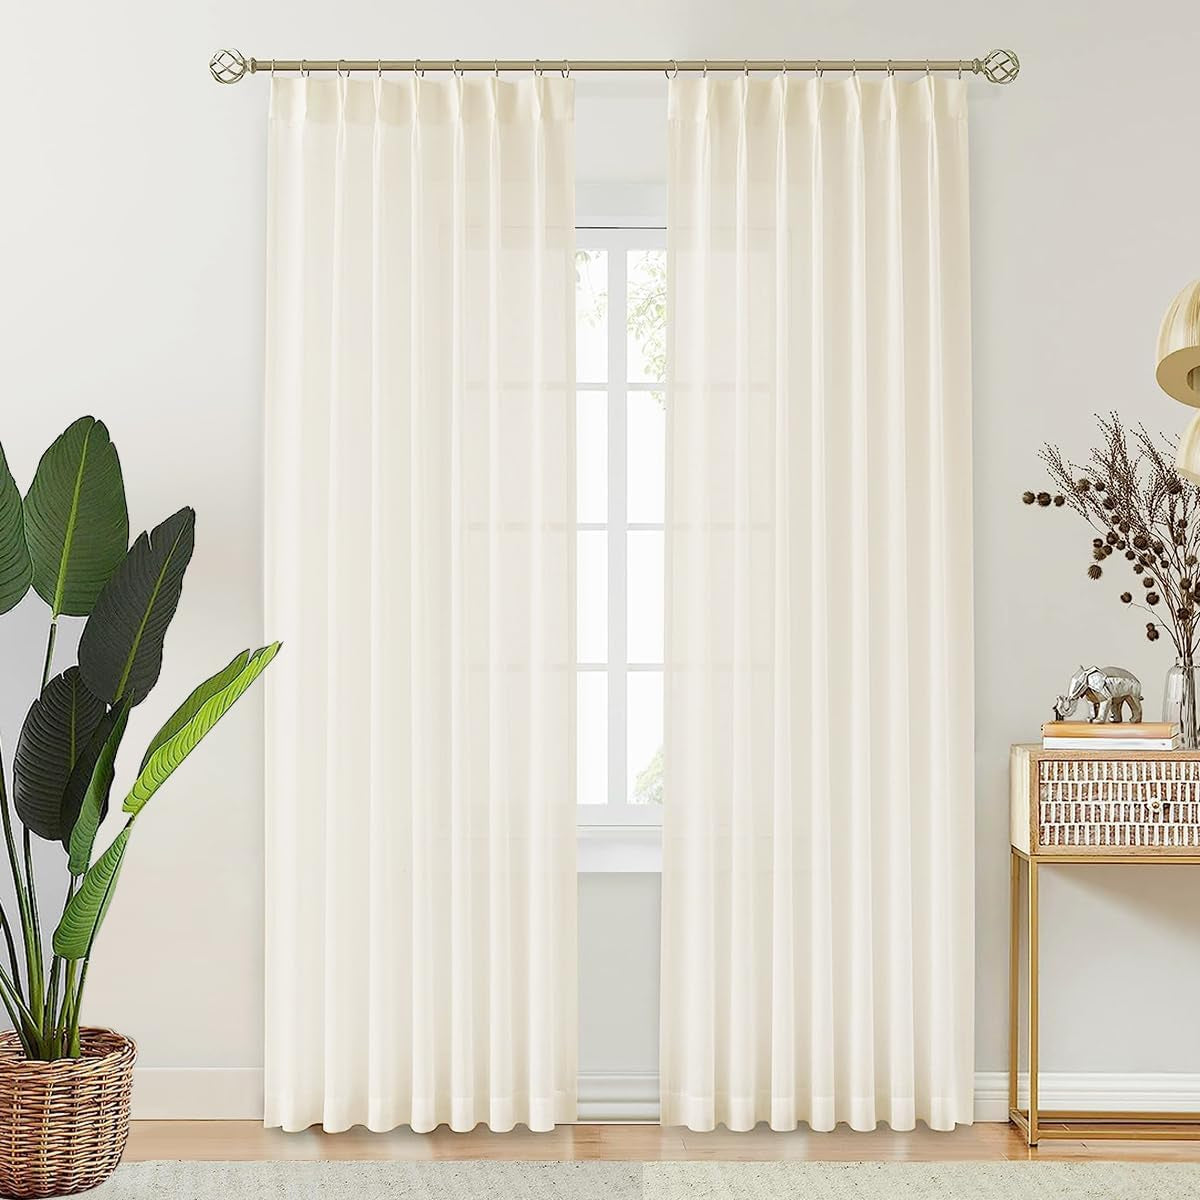 LIYAXUN Beige Sheer Curtains 102 Inches Long, Pinch Pleated Sheers Curtains for Track System, Custom Window Sheers, Thin, Solid, Light Weight (2 Panels, 50 Inches Wide Each Panel, Beige)  LIYAXUN   